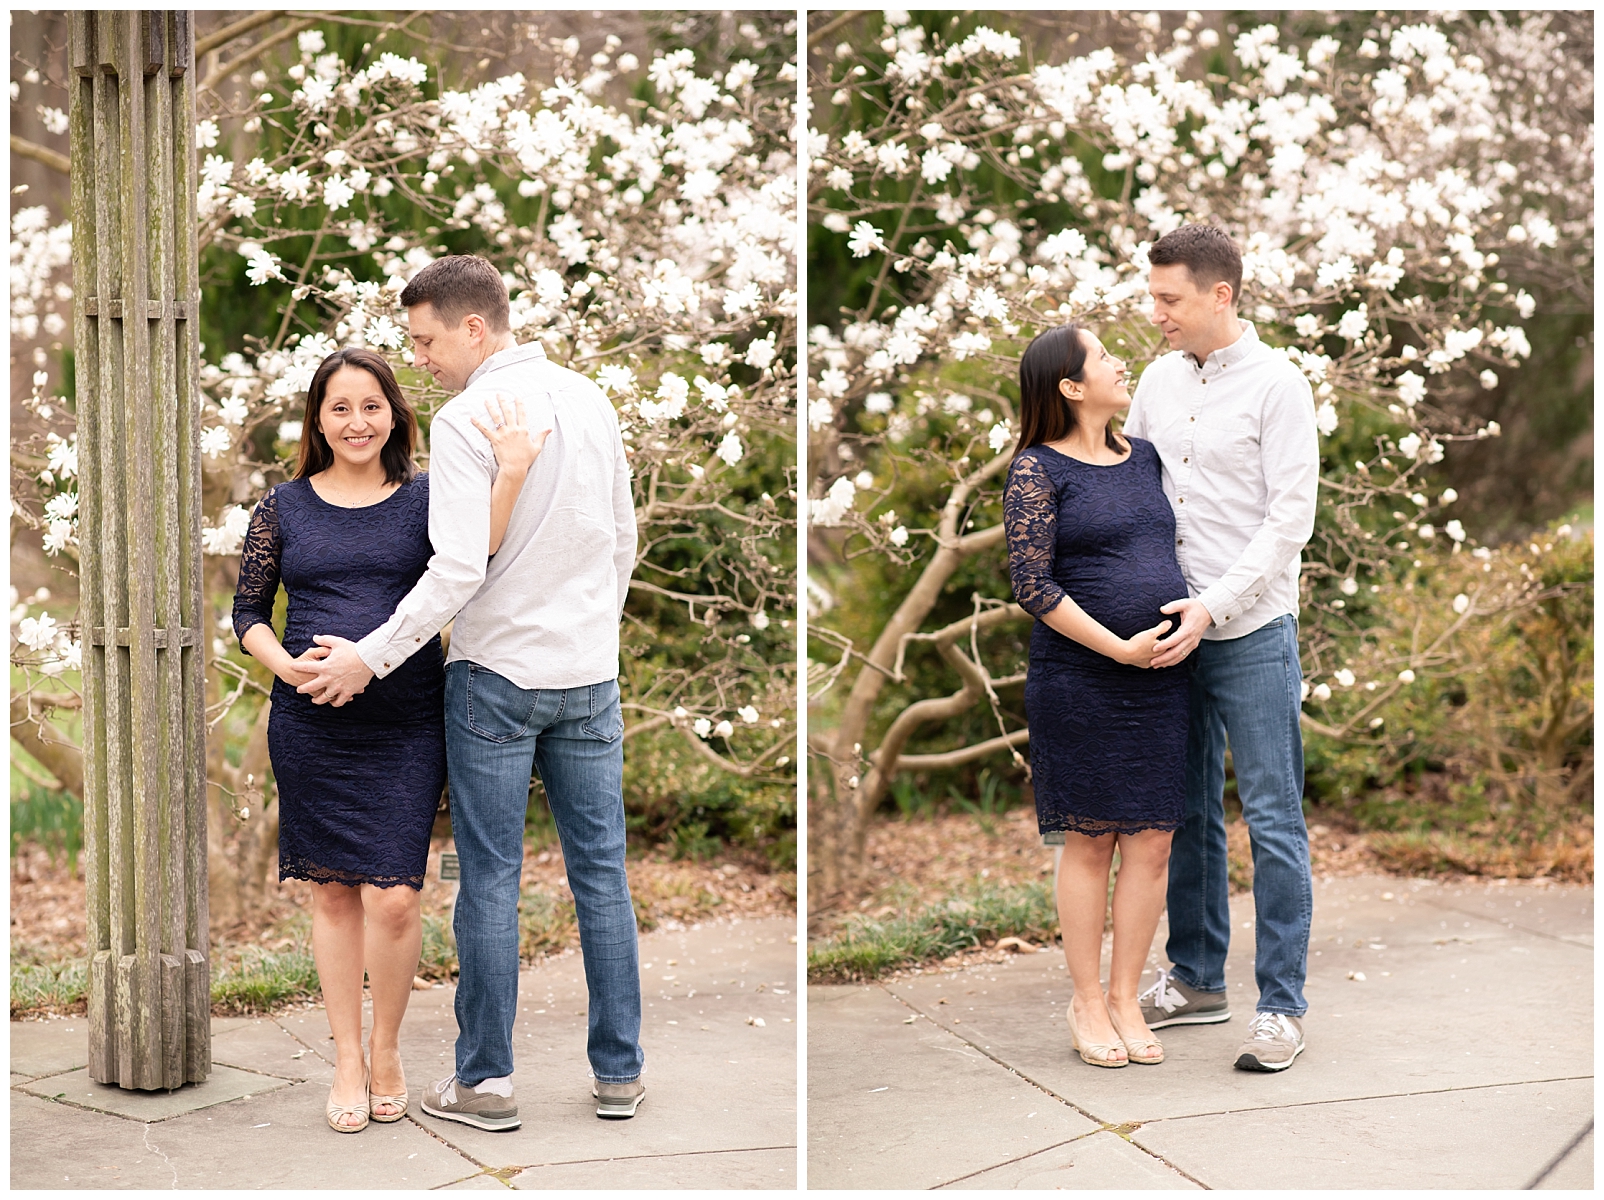 Maternity portraits of a couple near a flowering tree